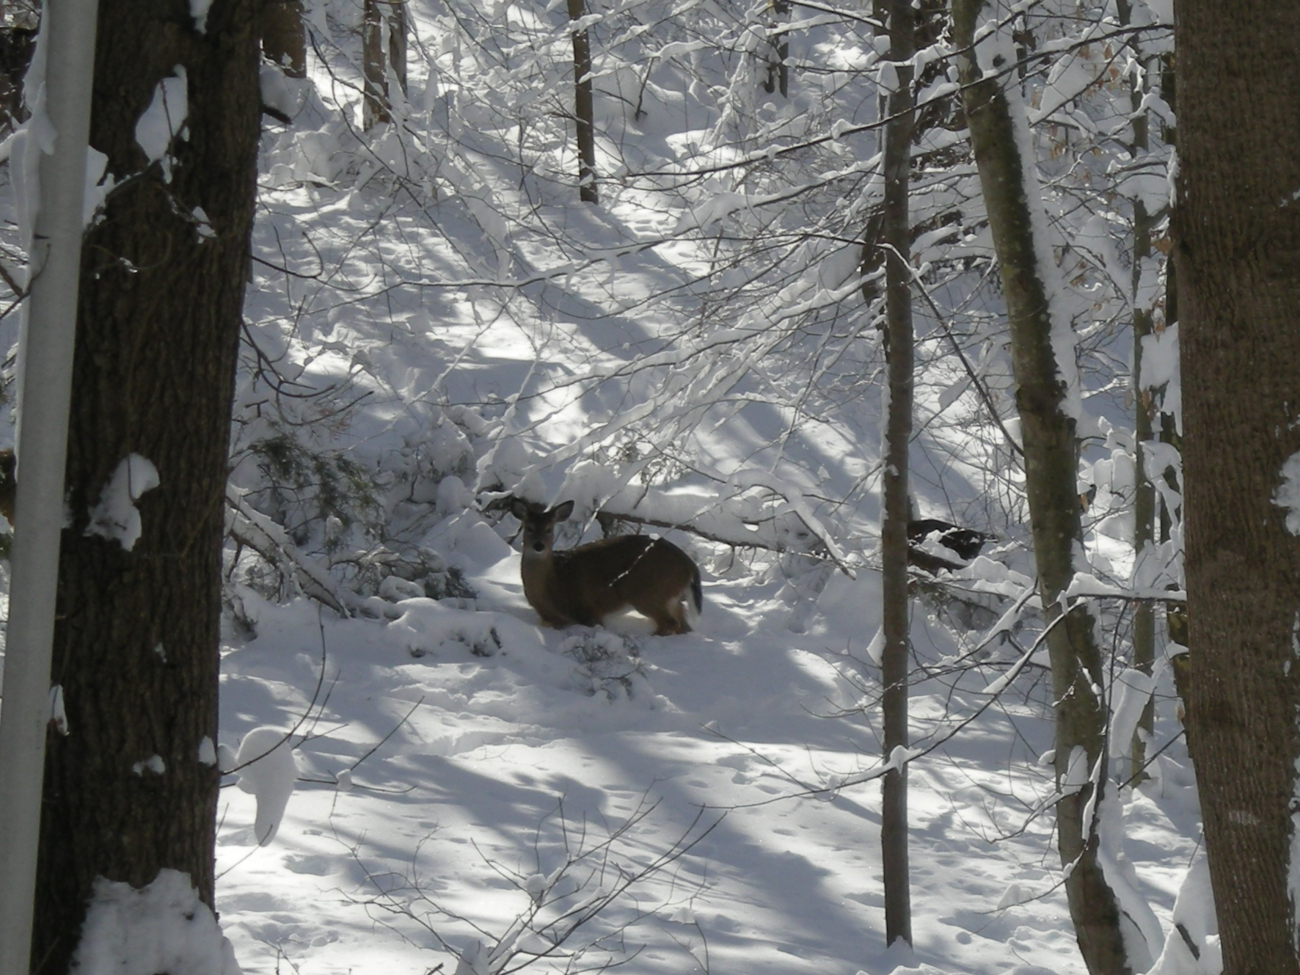 Deer up to belly in snow probably wondering what to do for dinner